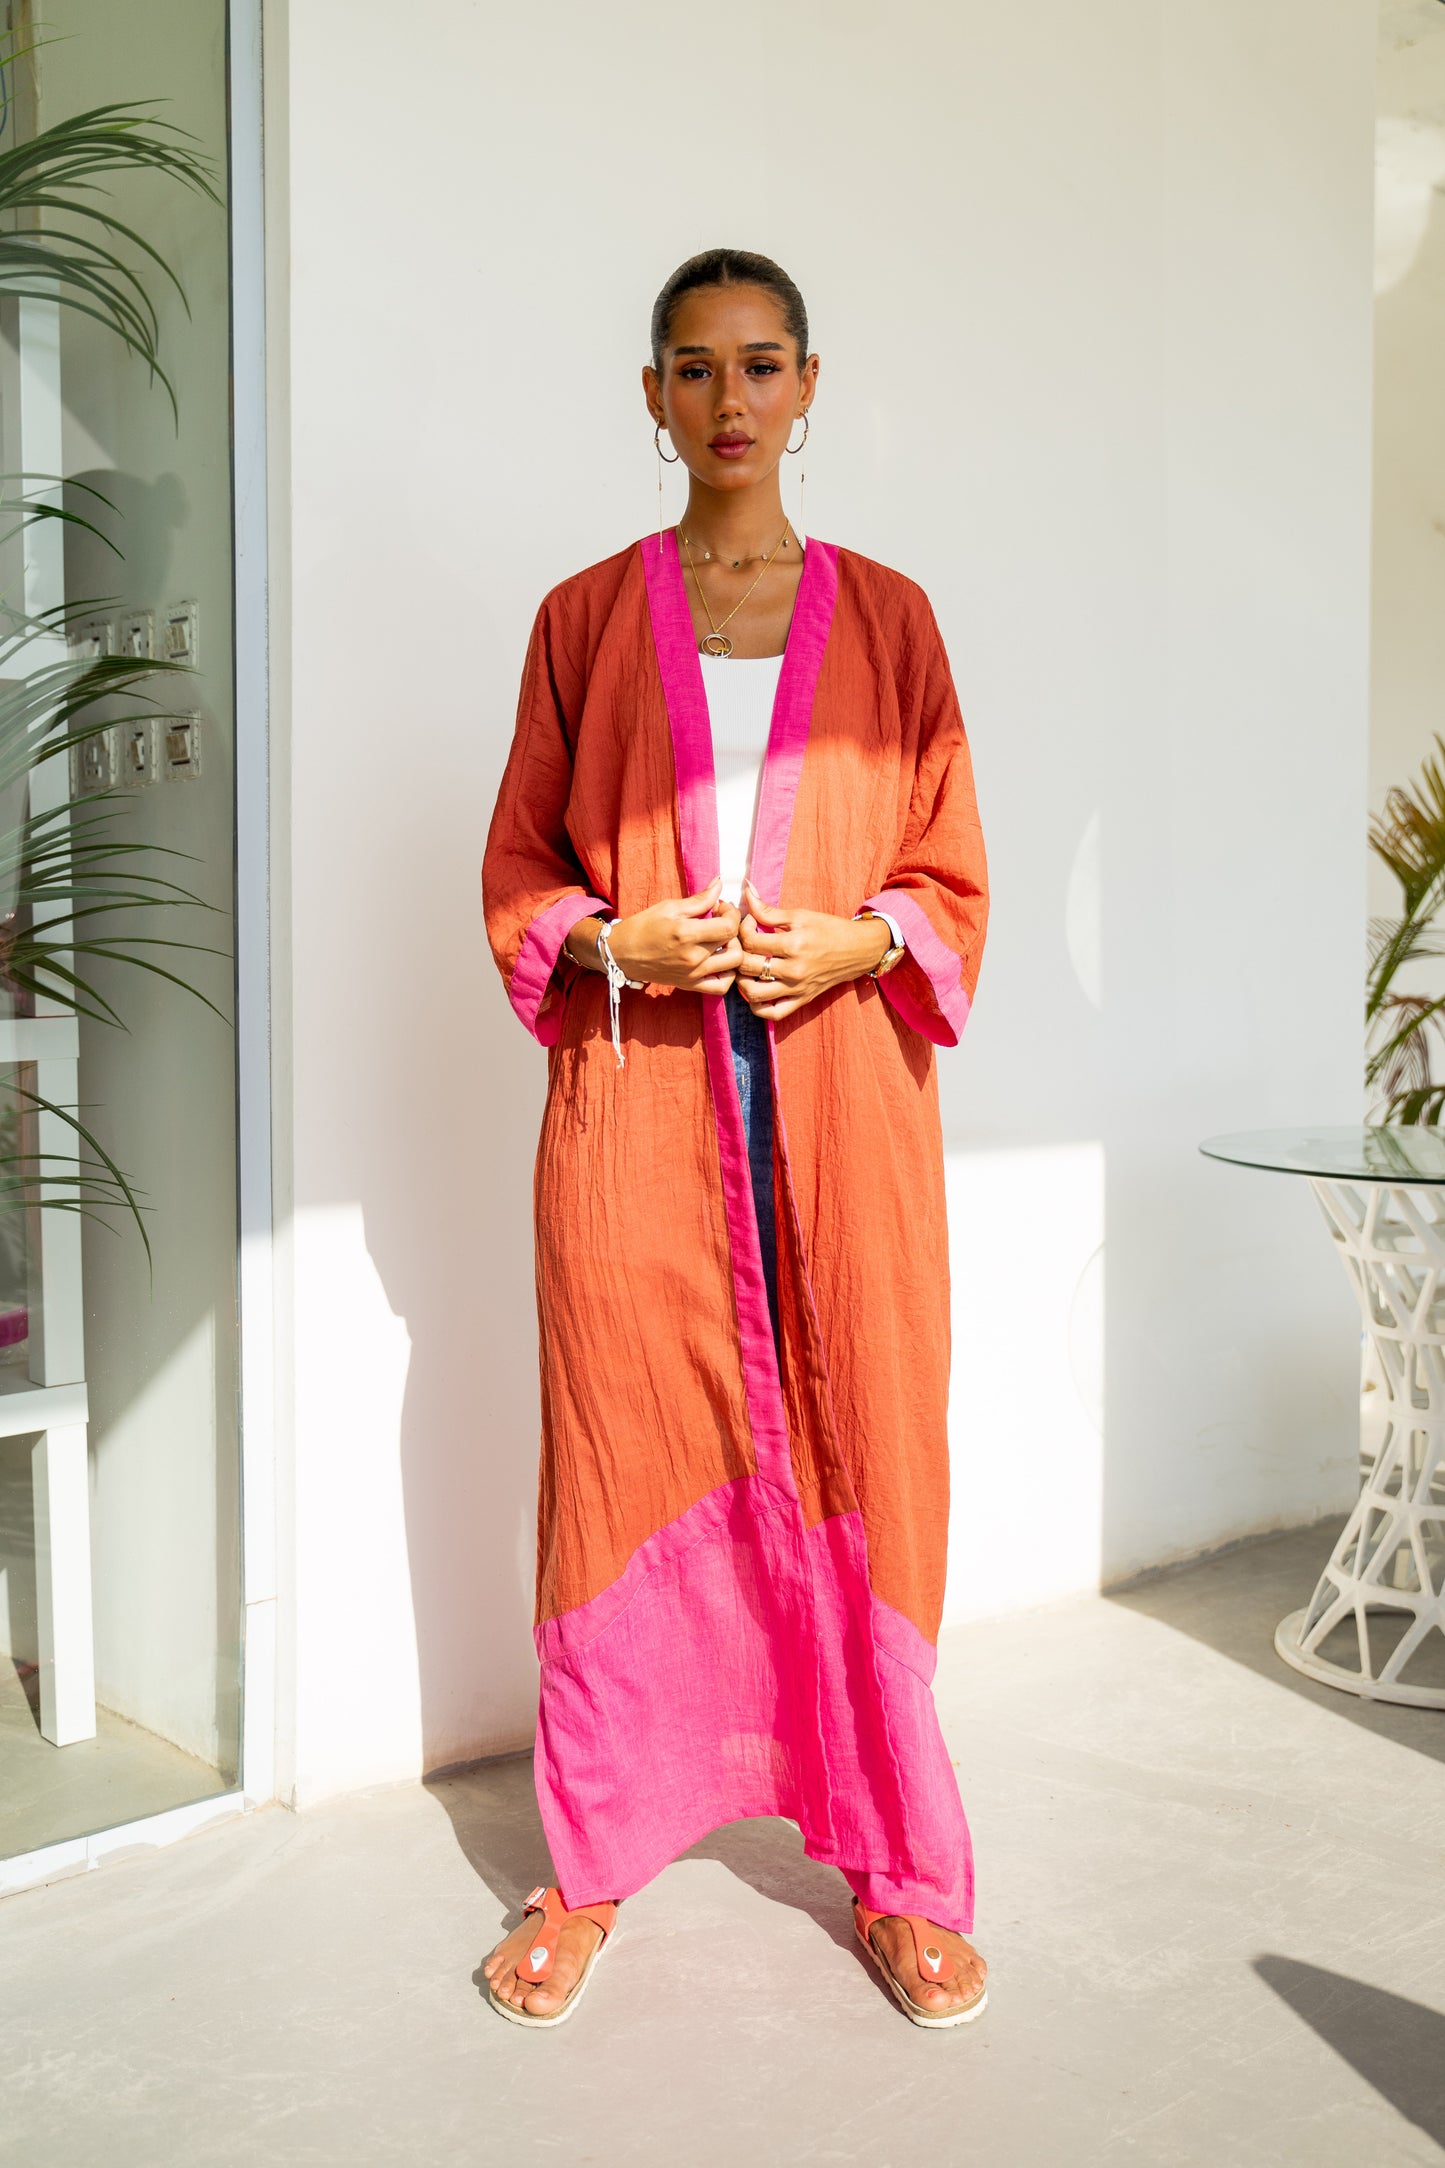 The Mykonos Abaya - Lightweight for summer - The Untitled Project